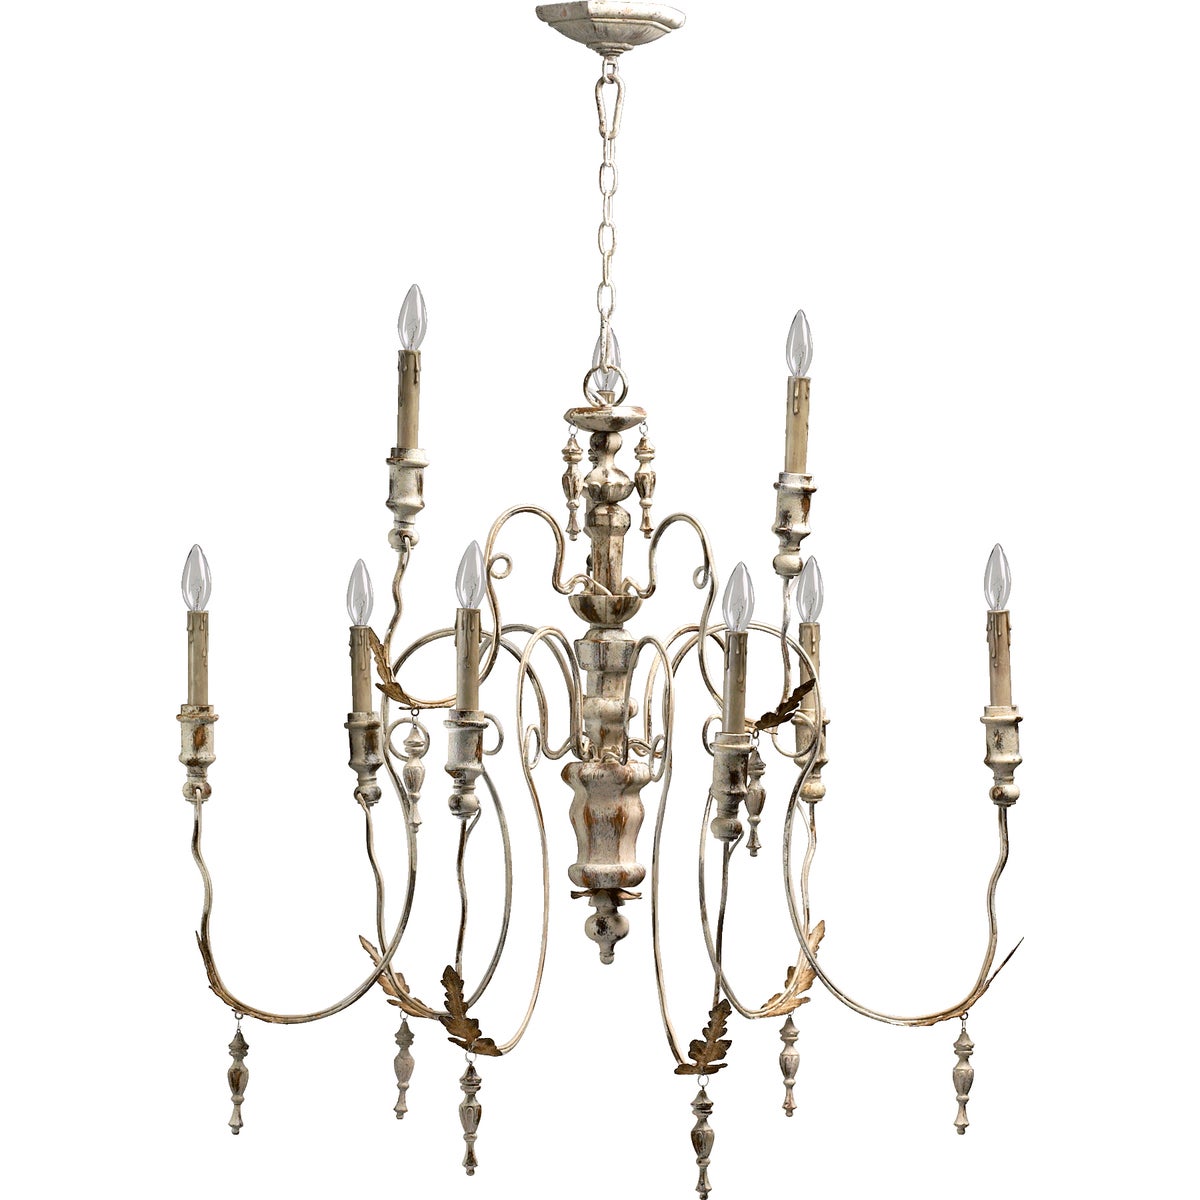 Italian Chandelier with candlestick-styled lights, leaf motifs, and imperfect asymmetry, celebrating the region's rich history.